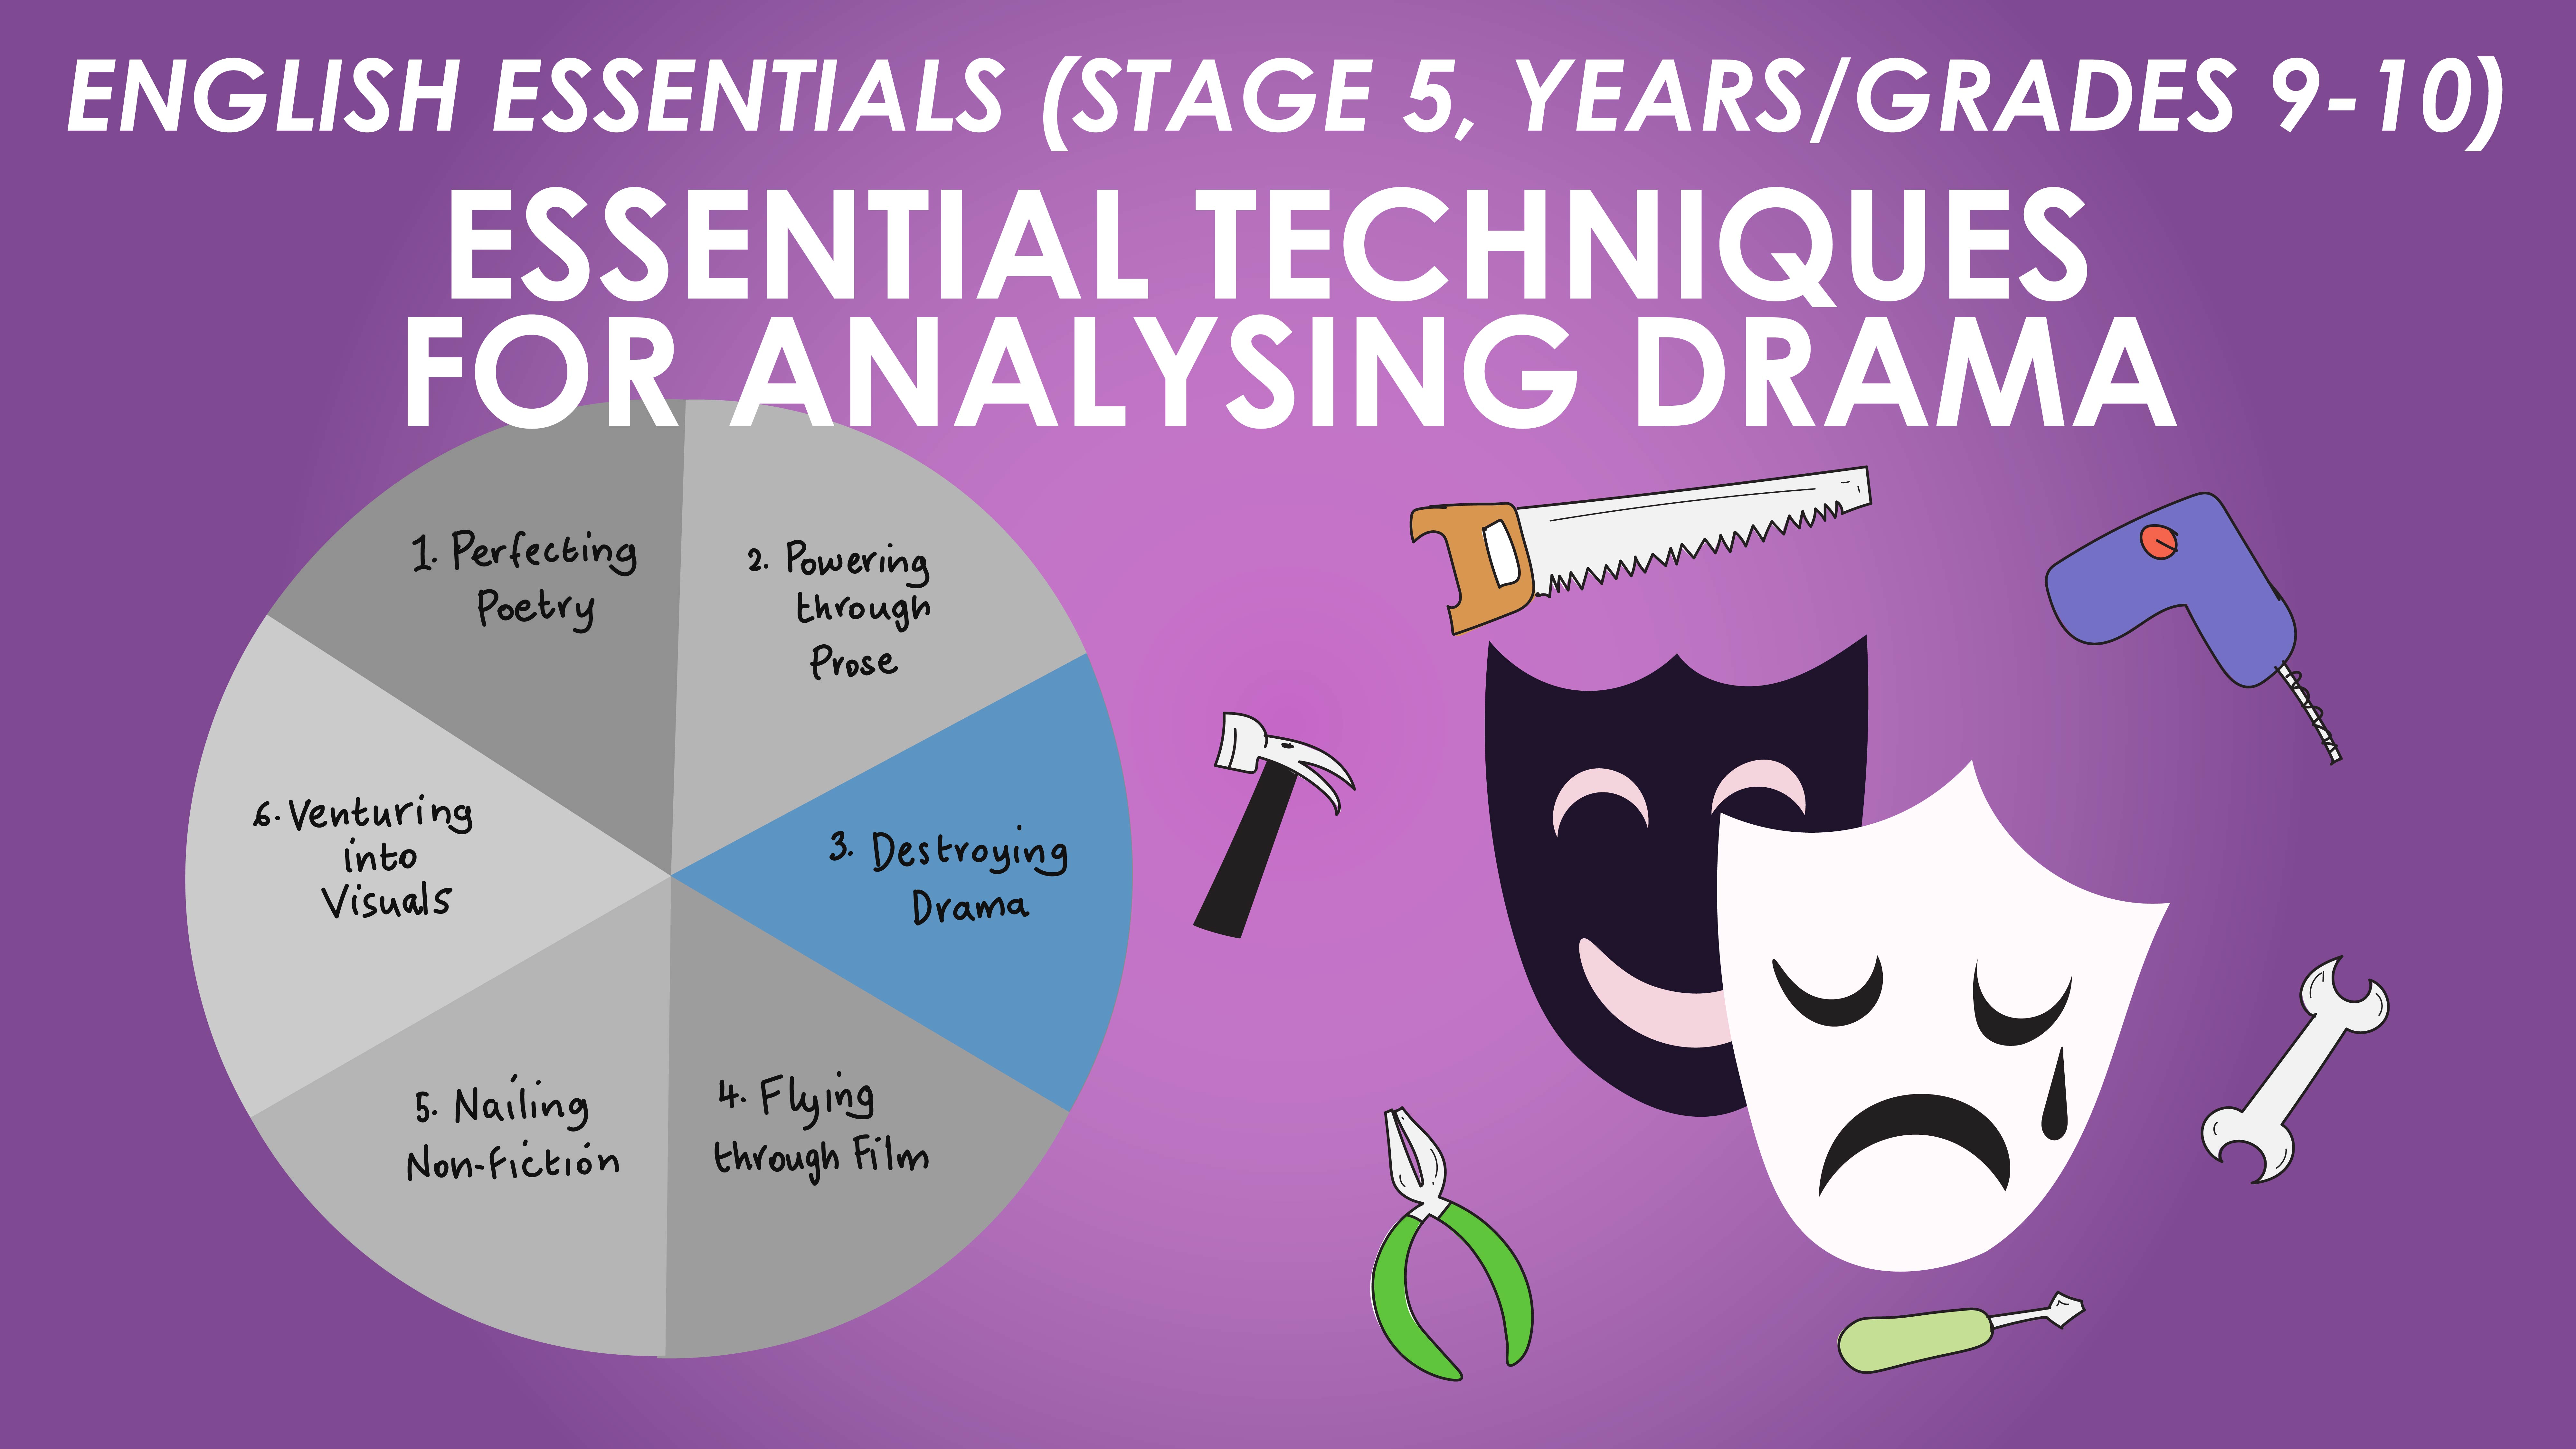 English Essentials - Destroying Drama - Essential Techniques for Analysing Drama (Stage 5, Years/Grades 9-10)